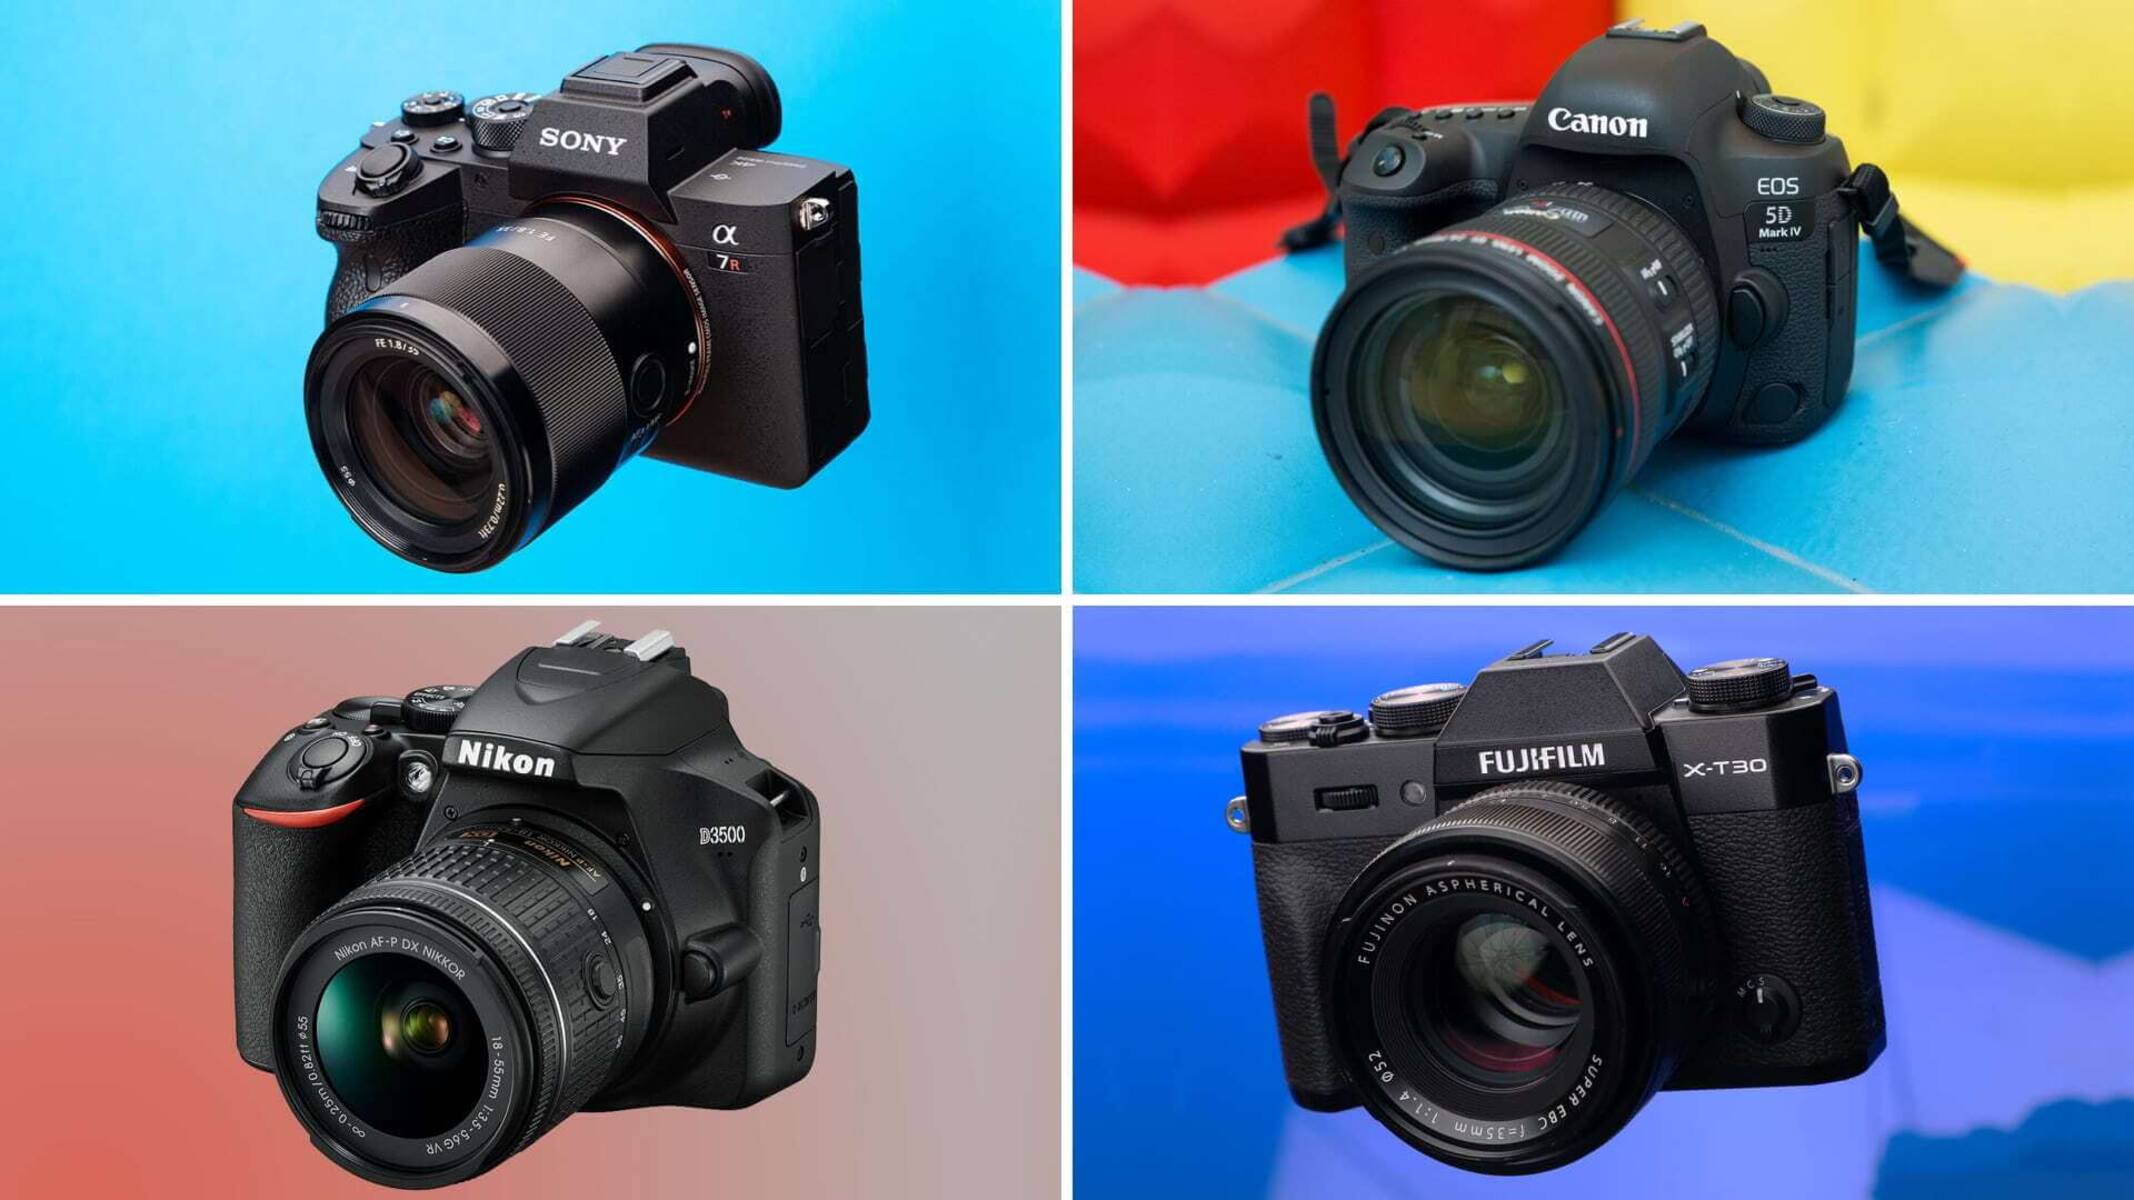 Why Are Mirrorless Cameras More Expensive Than Regular Cameras